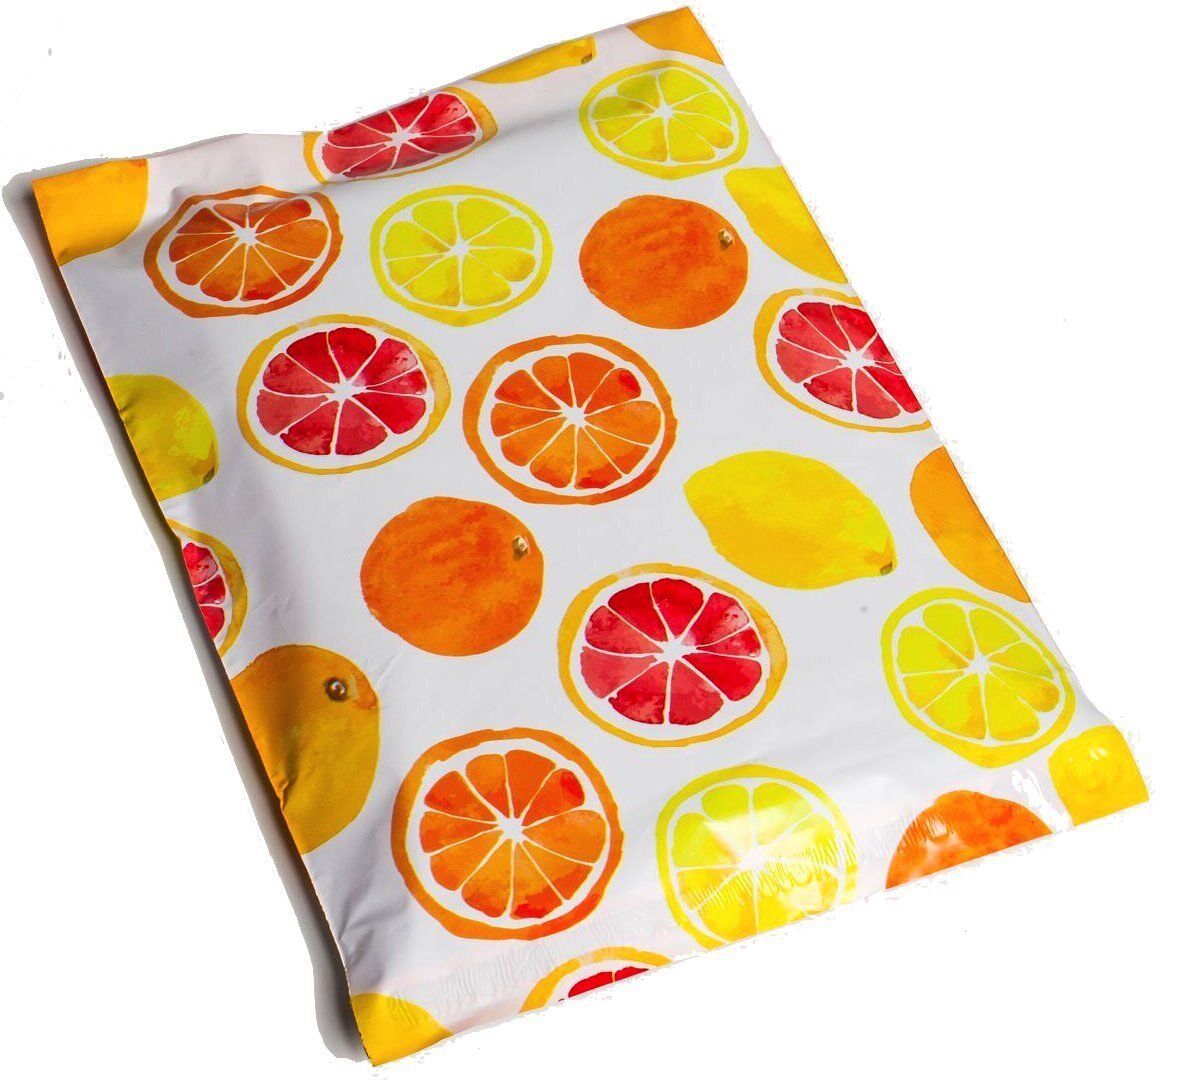 Citrus Orange Poly Mailers Size 10x13 Colorful Shipping Bags - Shipping In Style